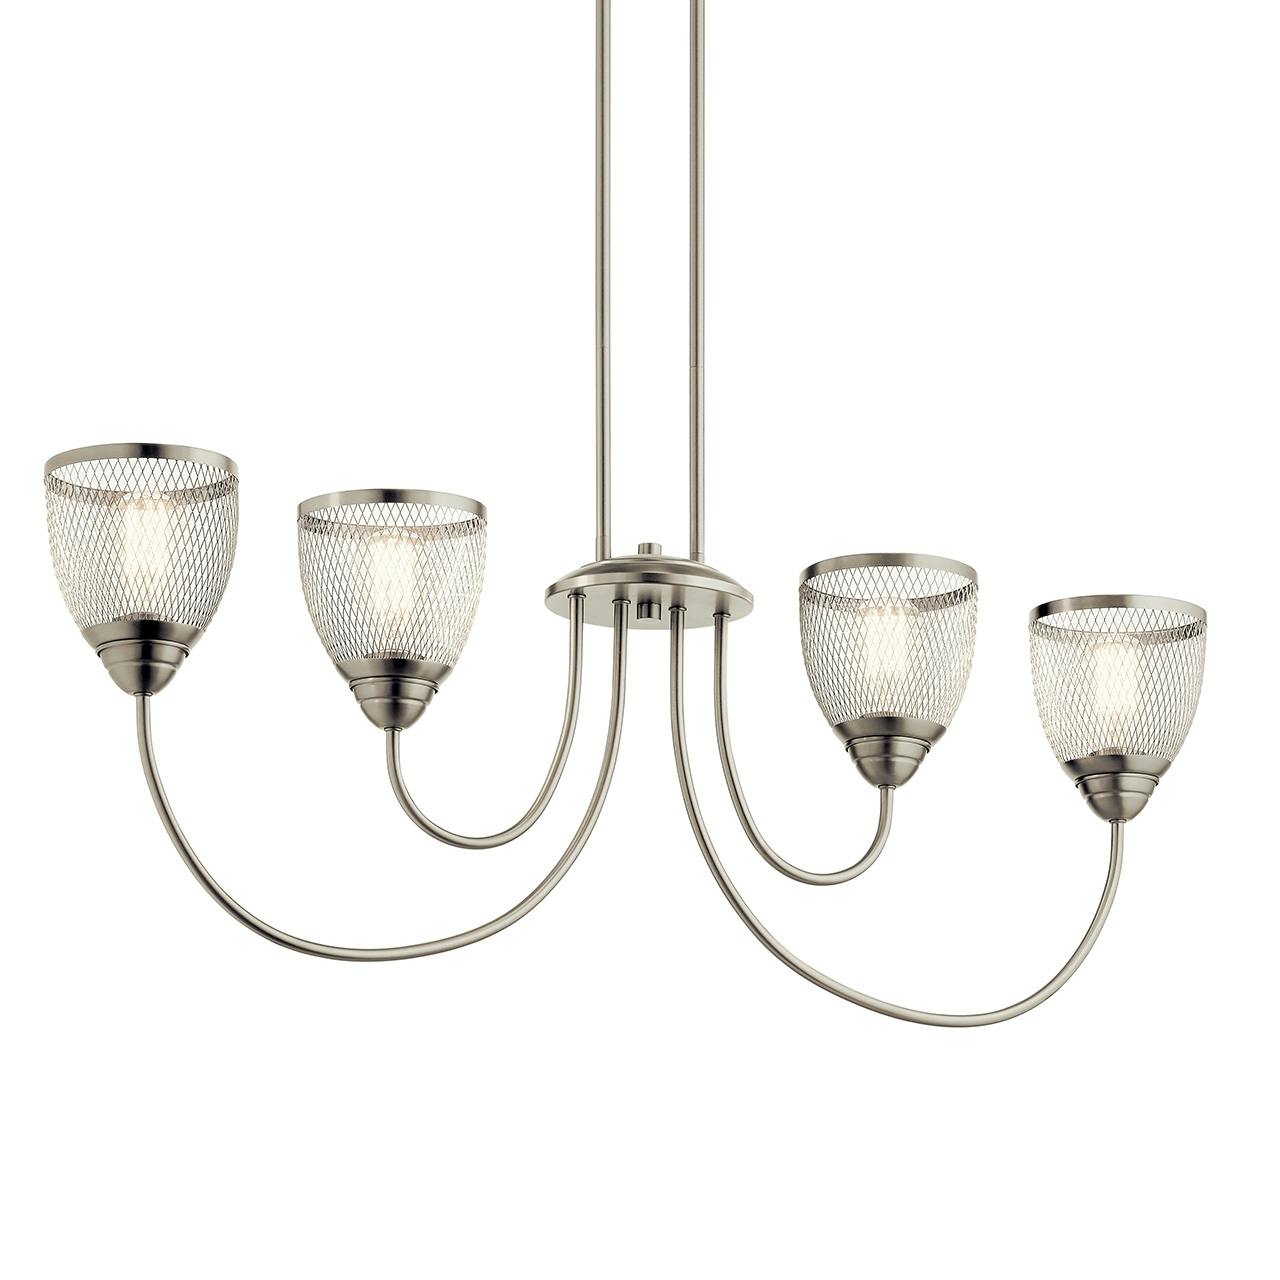 Voclain 4 Light Linear Chandelier Nickel without the canopy on a white background